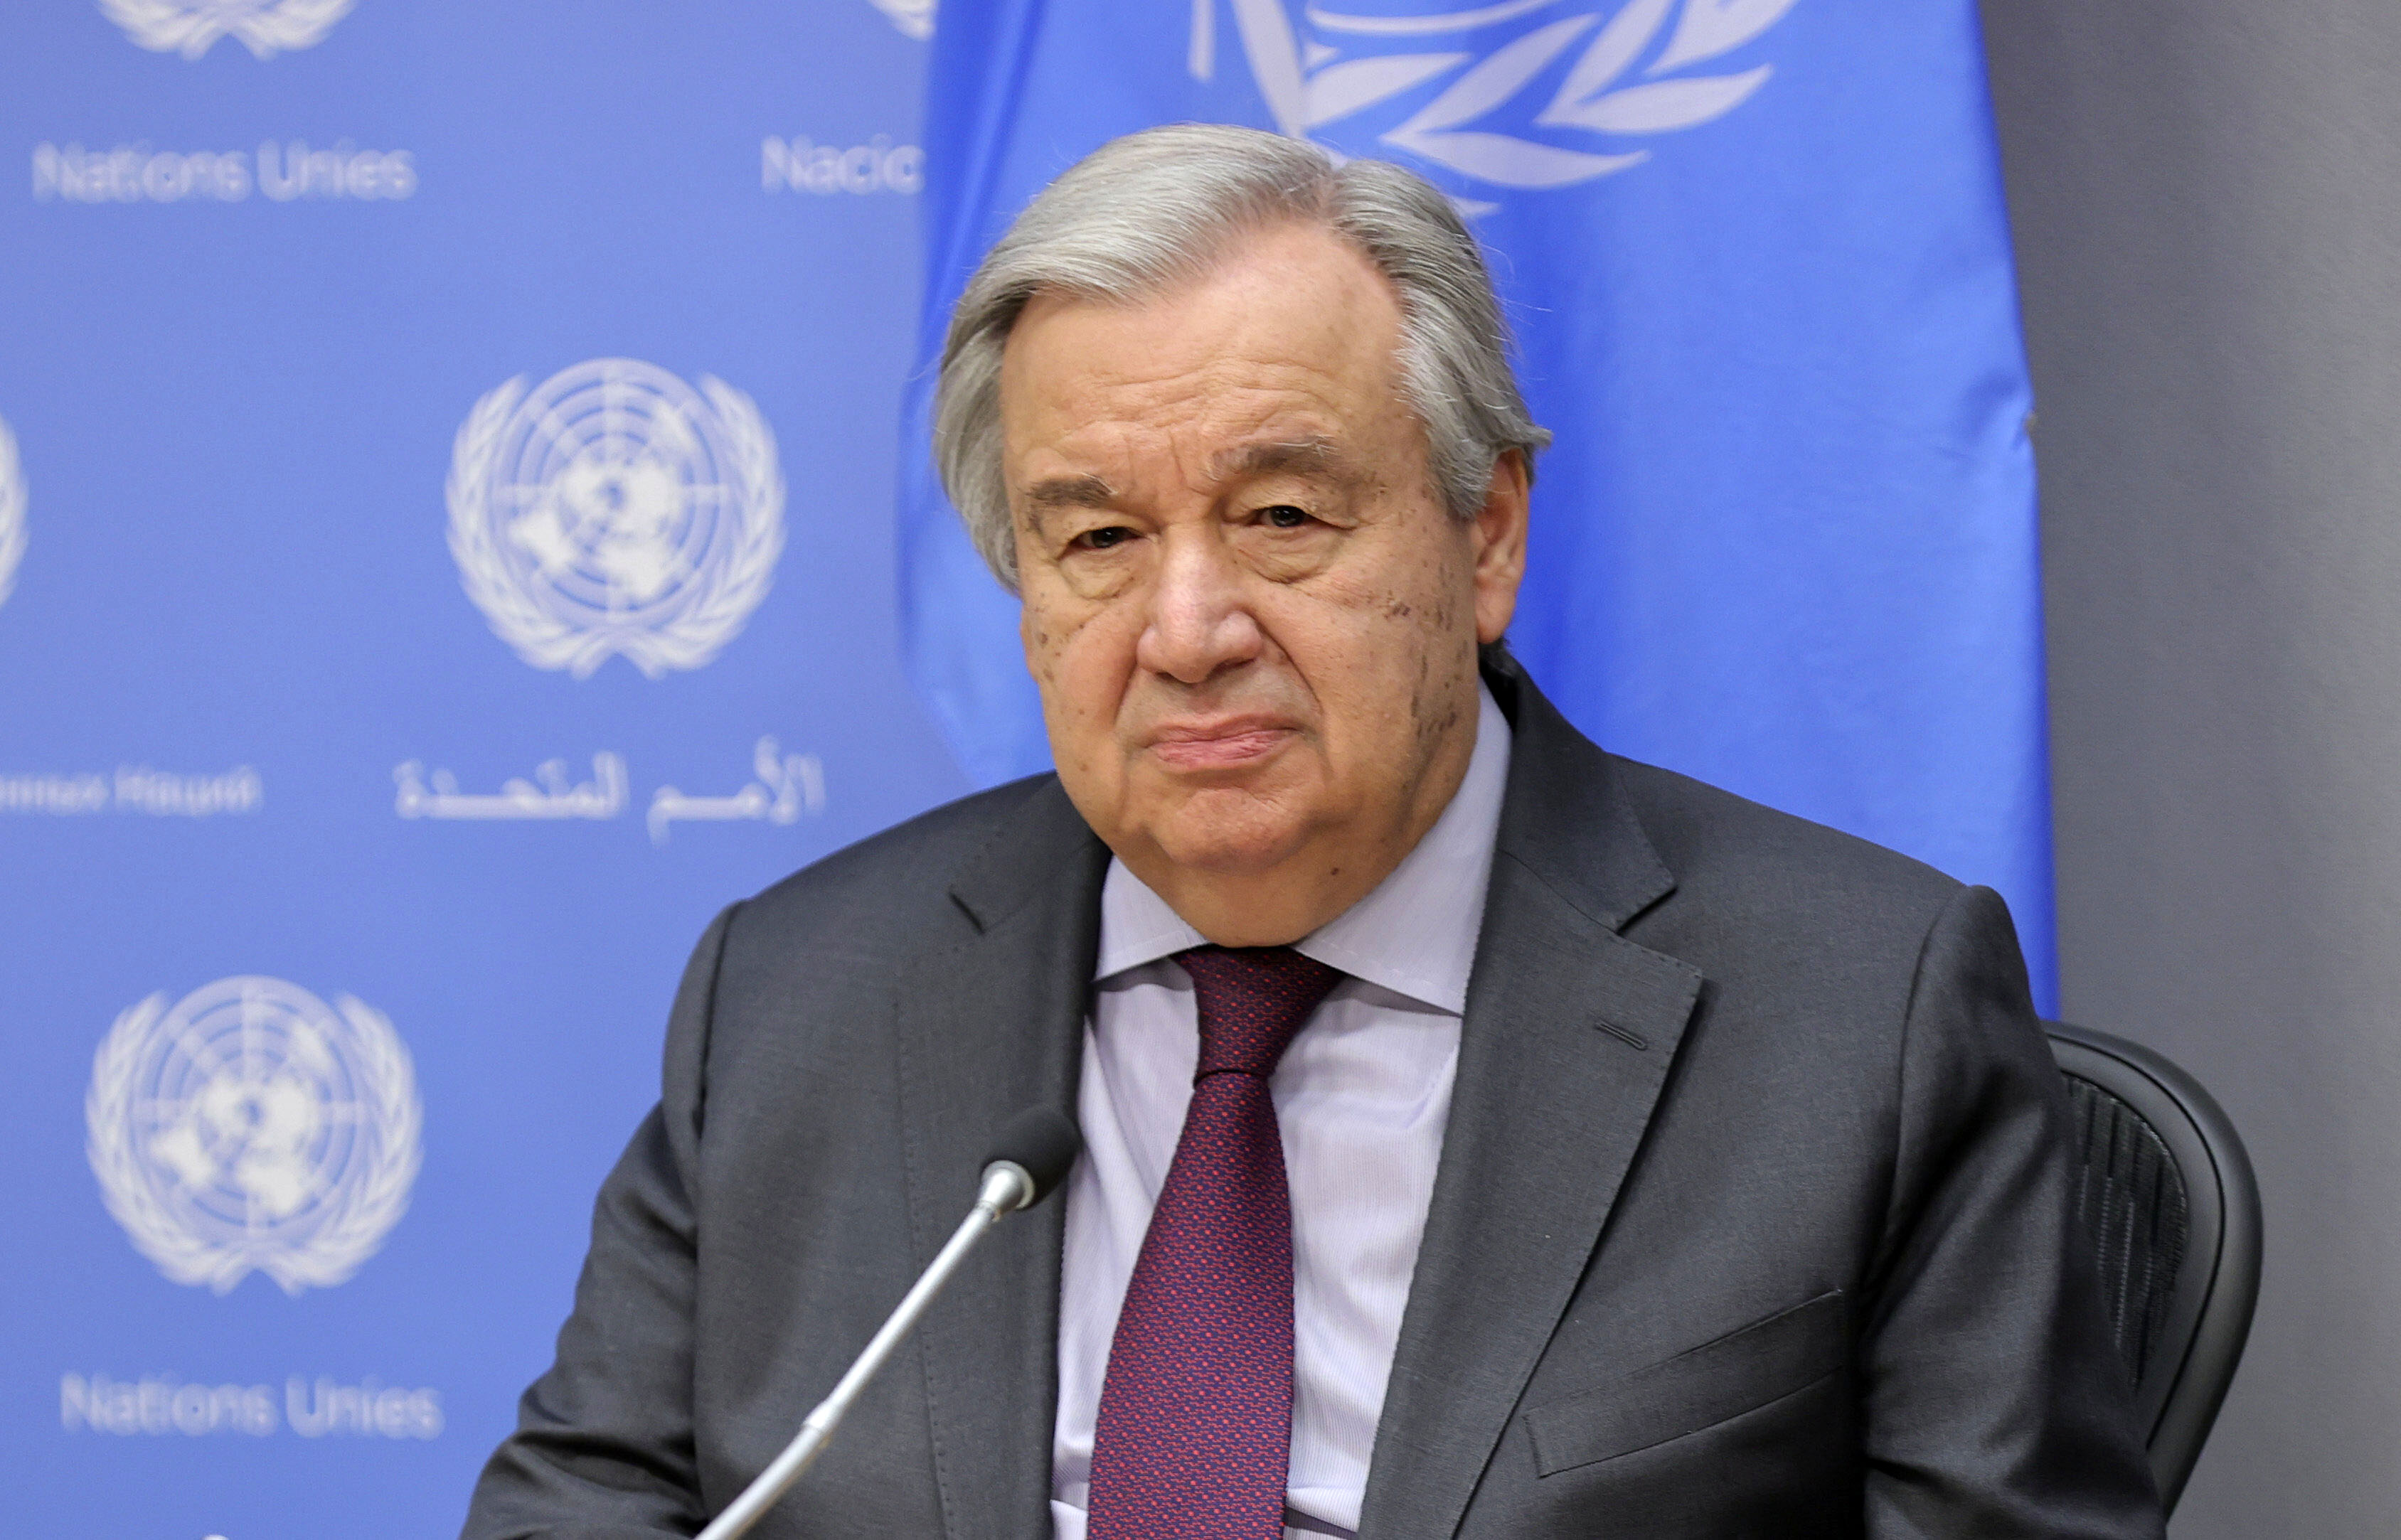 United Nations Secretary-General António Guterres holds a briefing in New York on March 10.